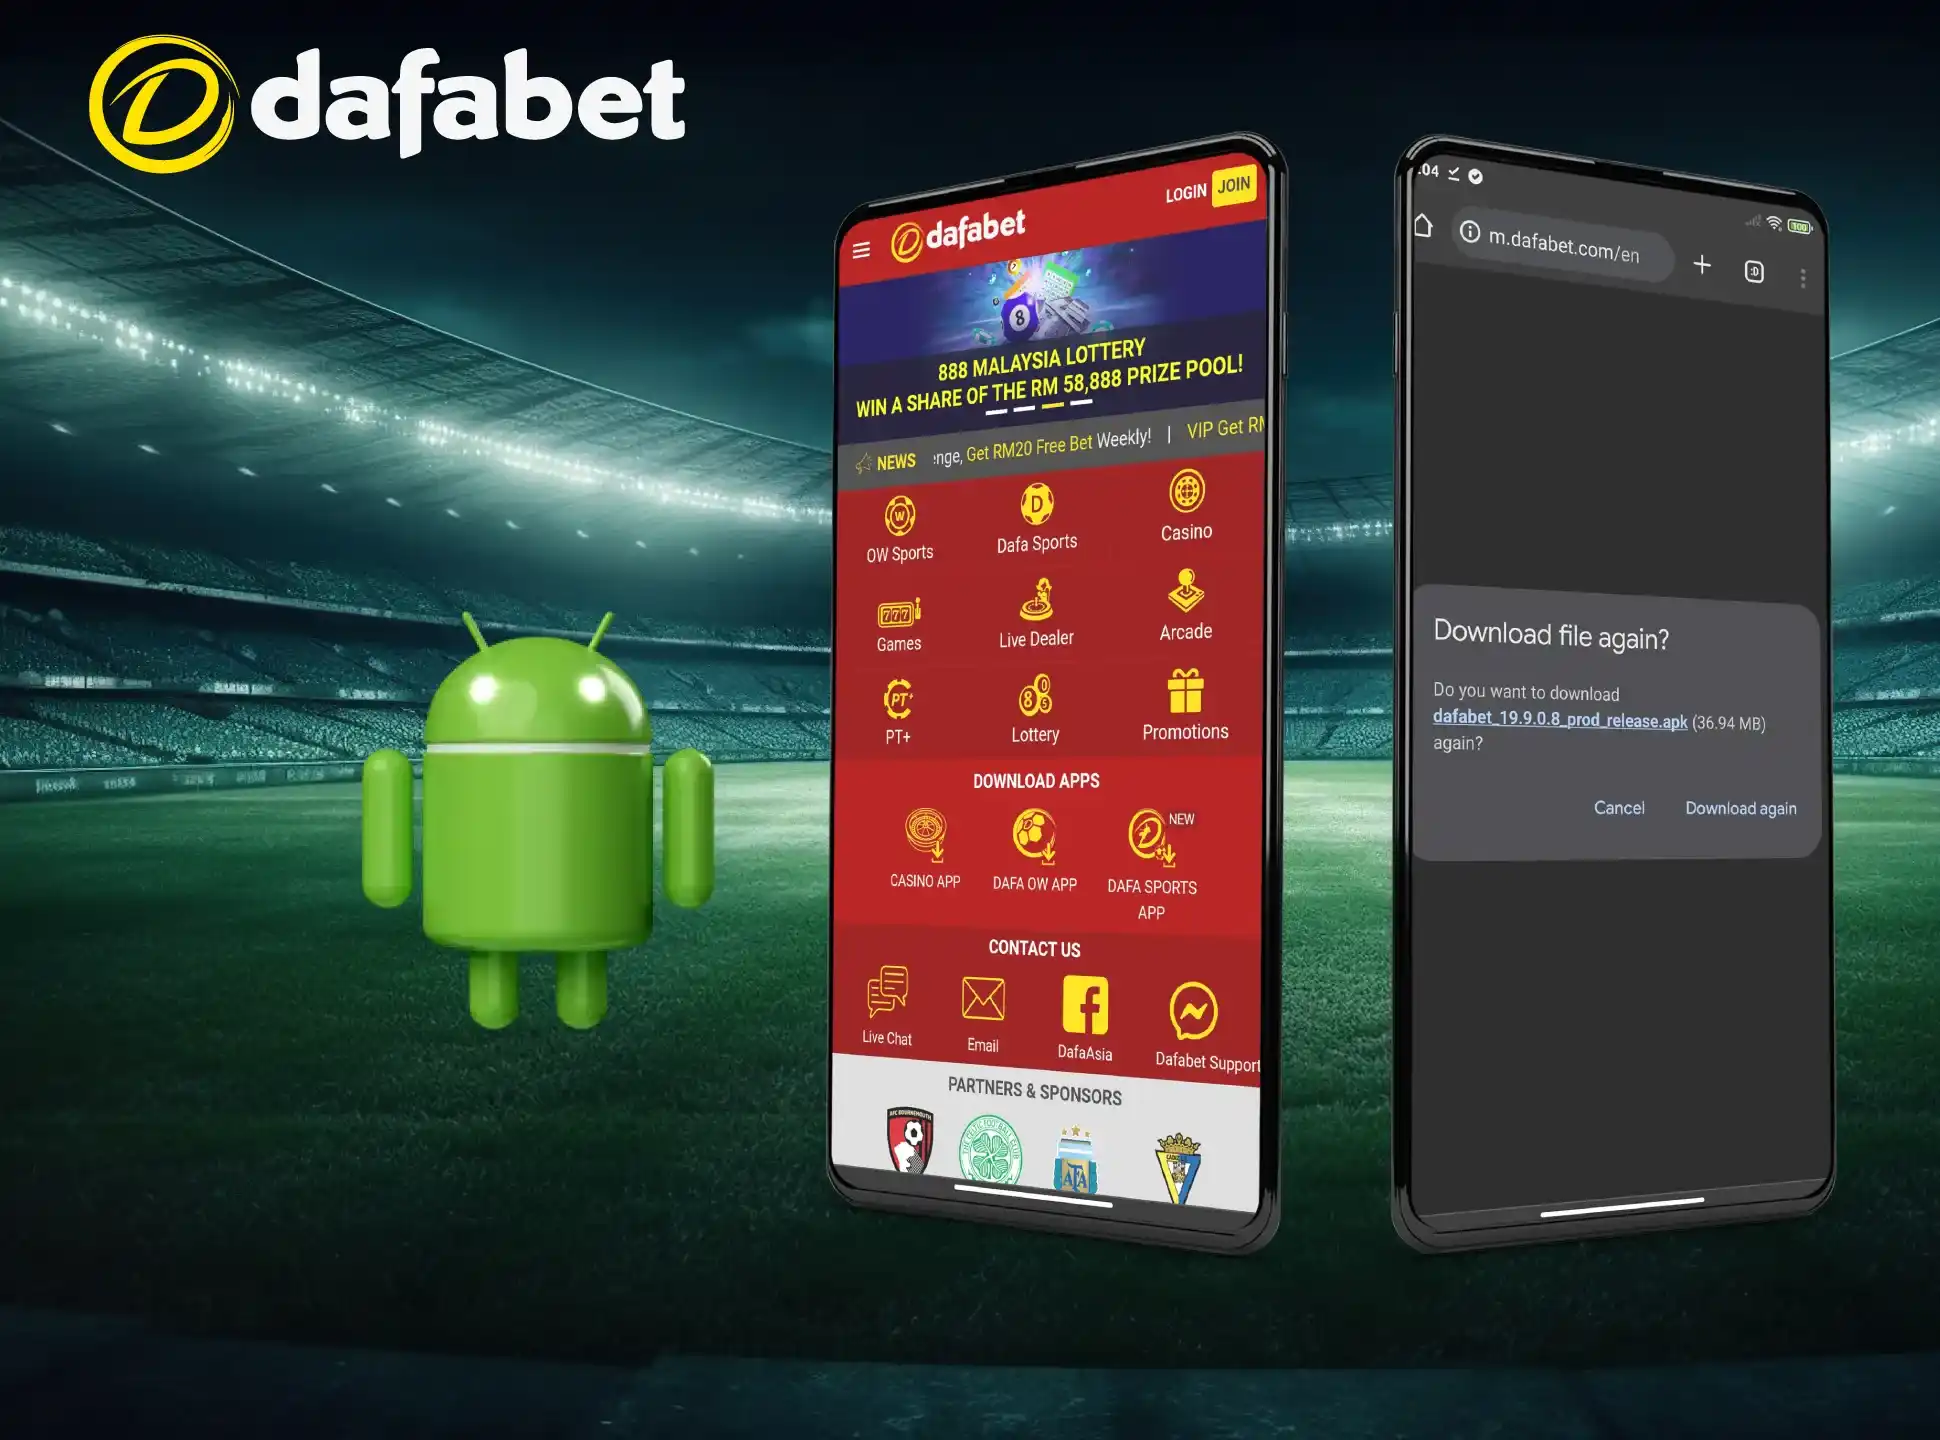 The Dafabet app is compatible with many Android smartphones.